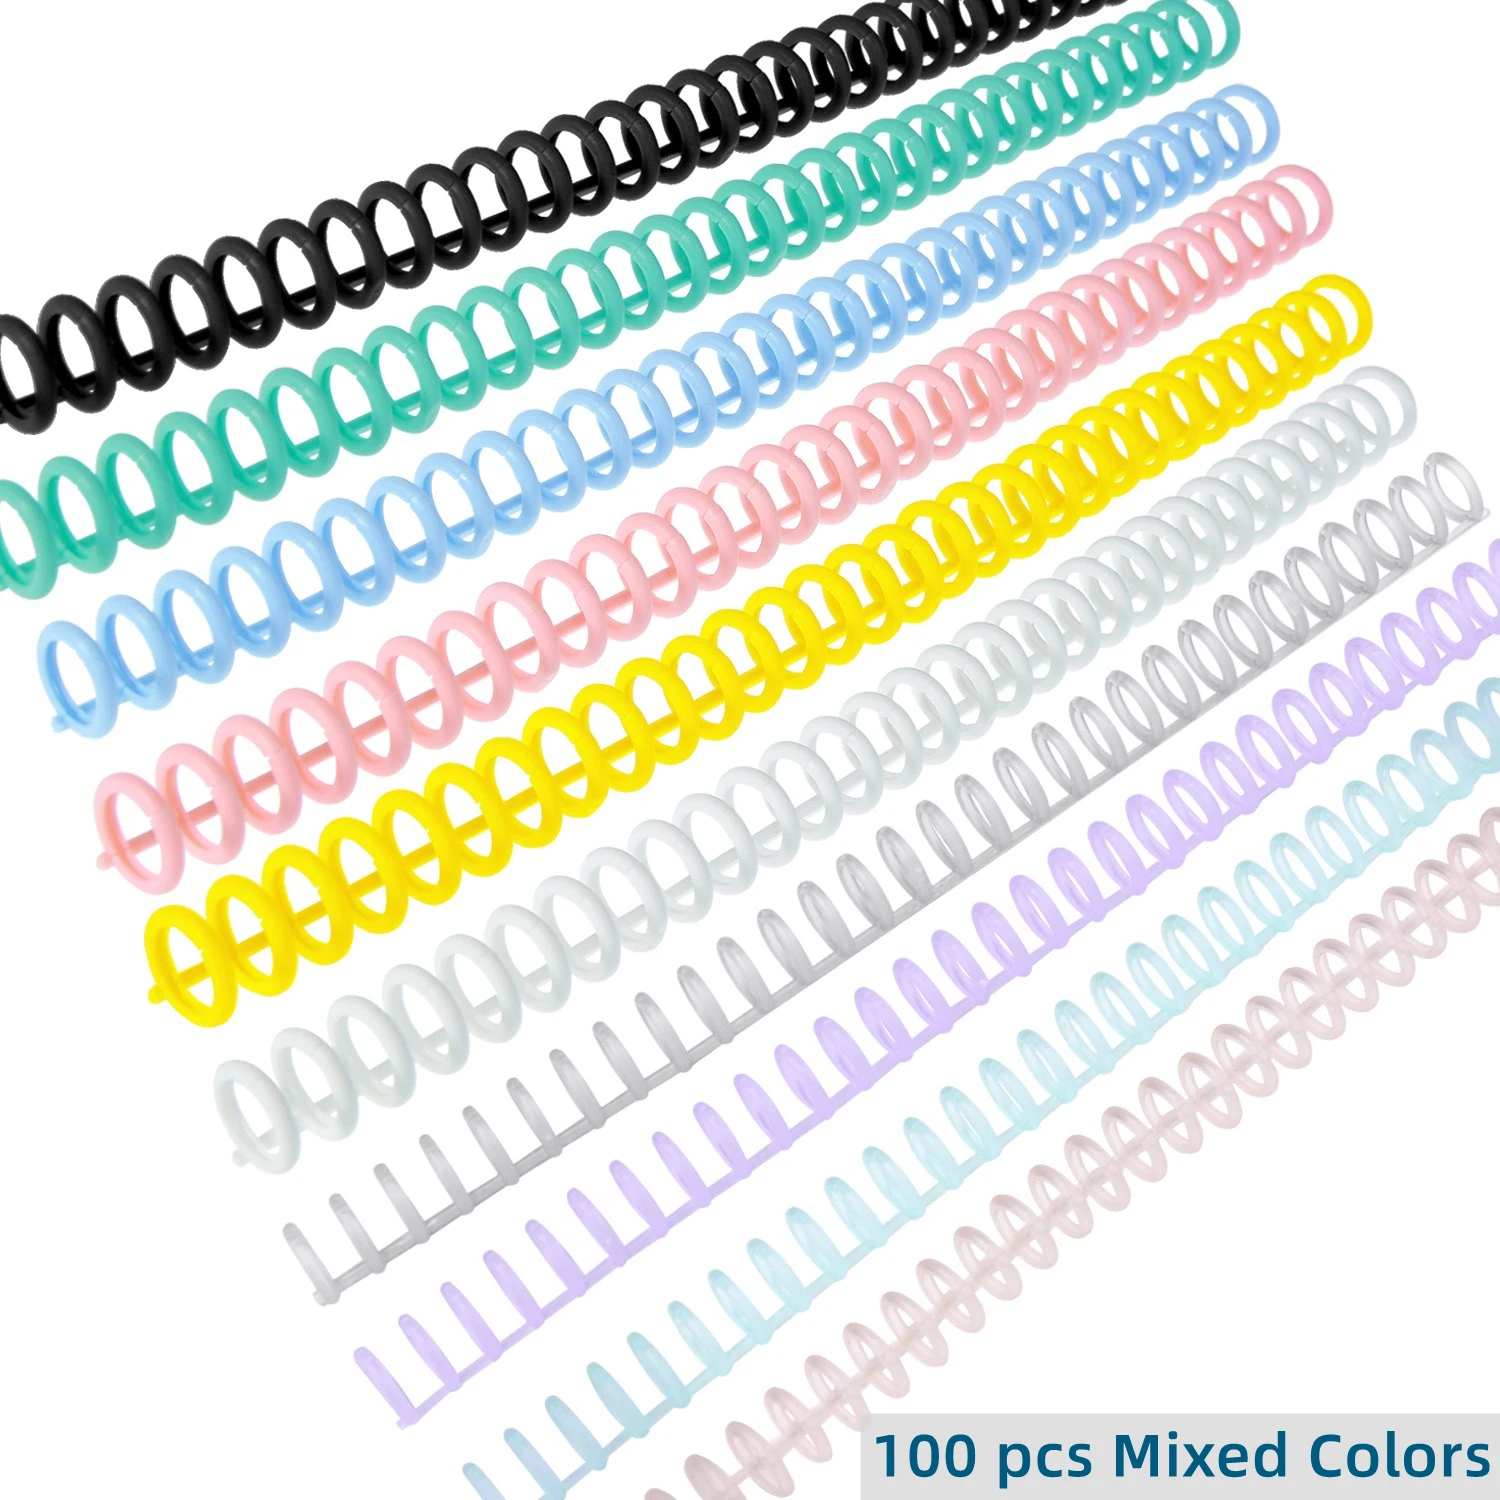 

100pcs 30 Holes Loose Binders Ring Binding Spines Combs 85 Sheets Capacity for DIY Paper Notebook Album Office School Supplies